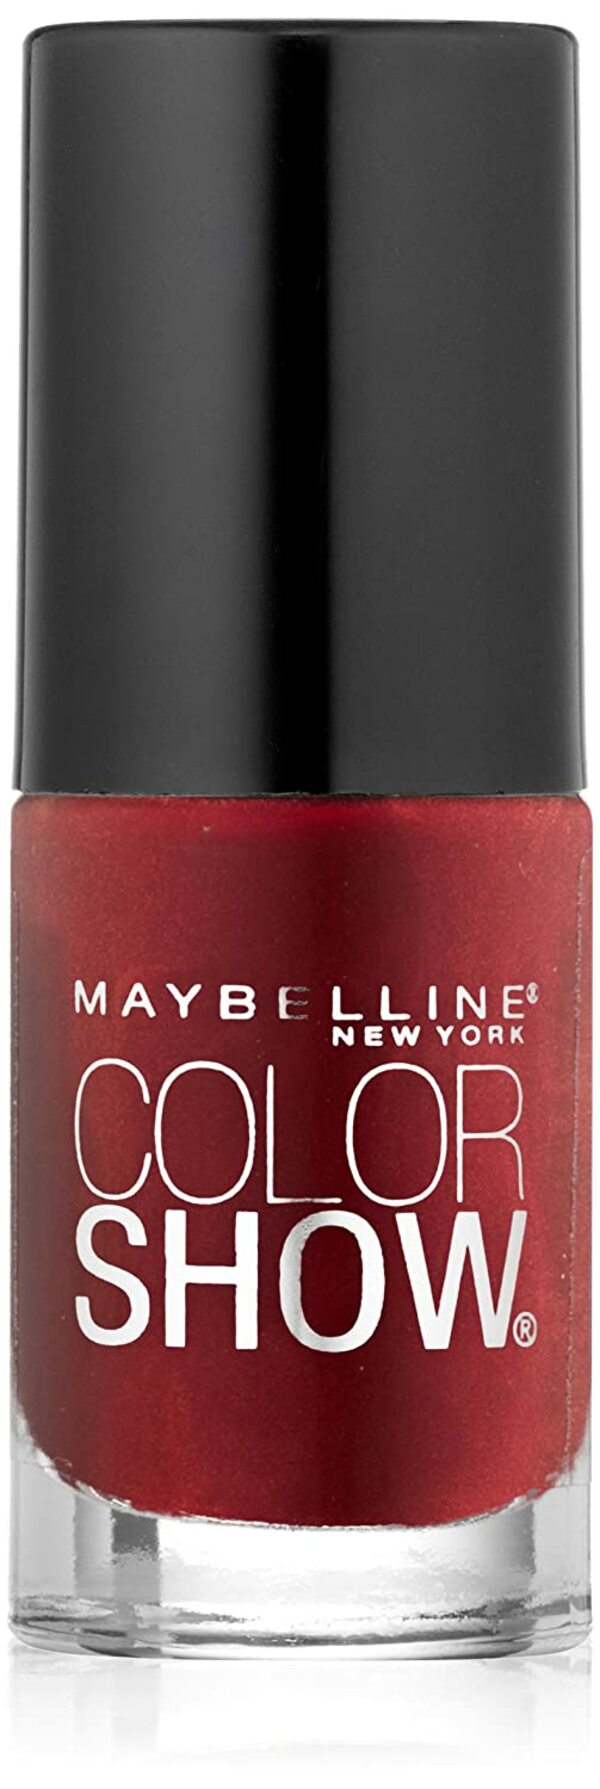 Nail polish swatch / manicure of shade Maybelline Rich in Ruby